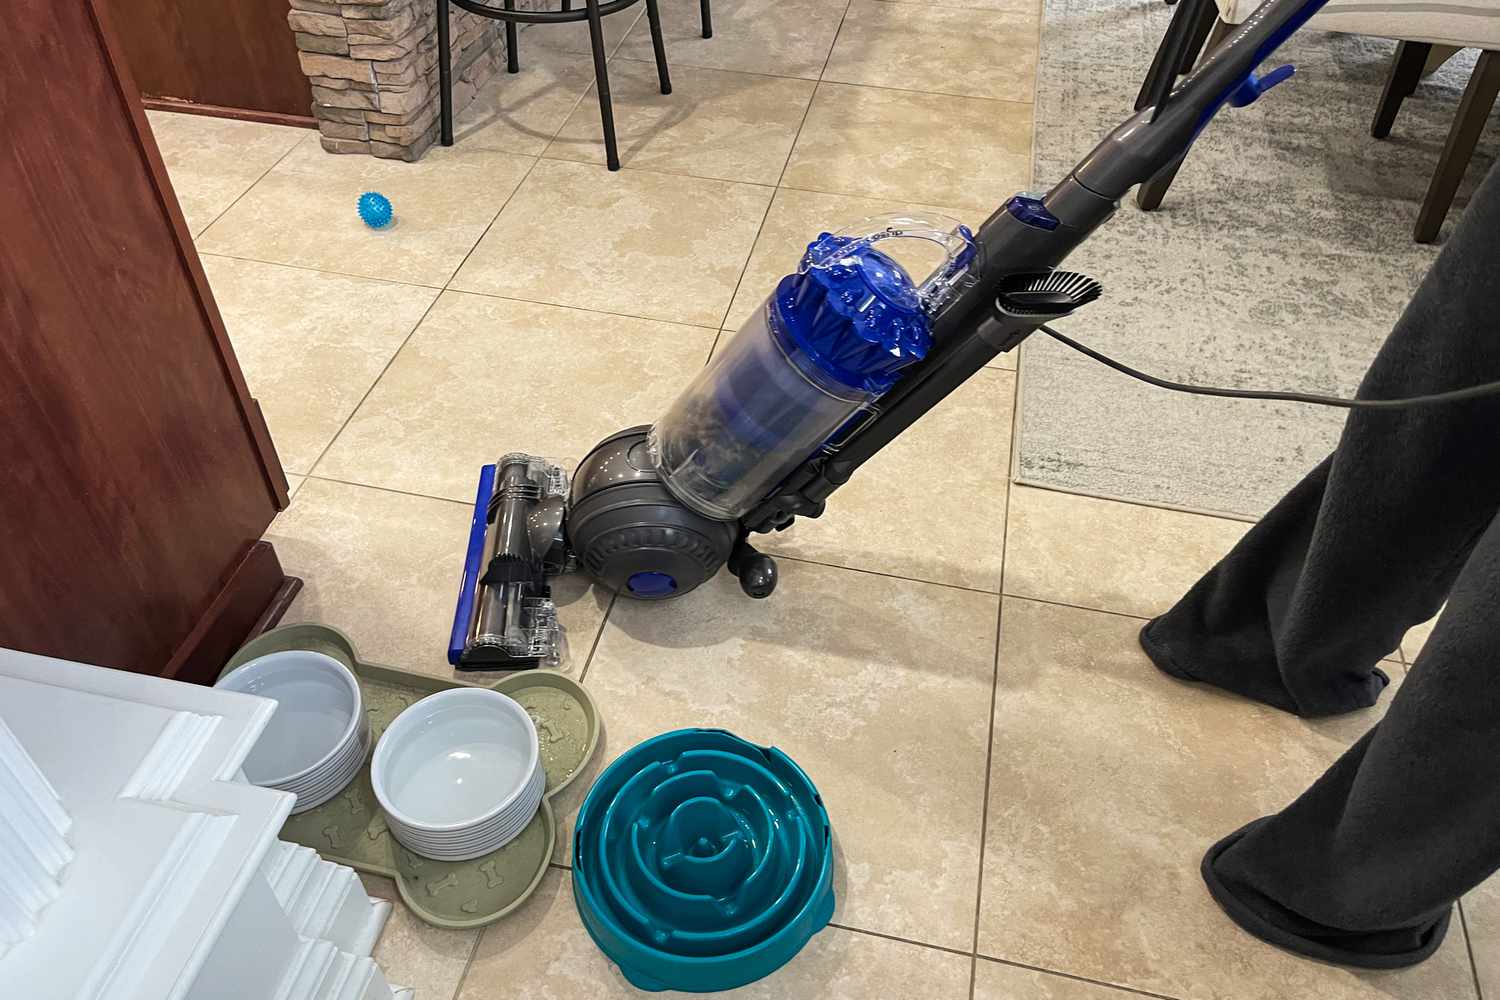 A person uses the Dyson Ball Animal Total Clean to clean a tile floor